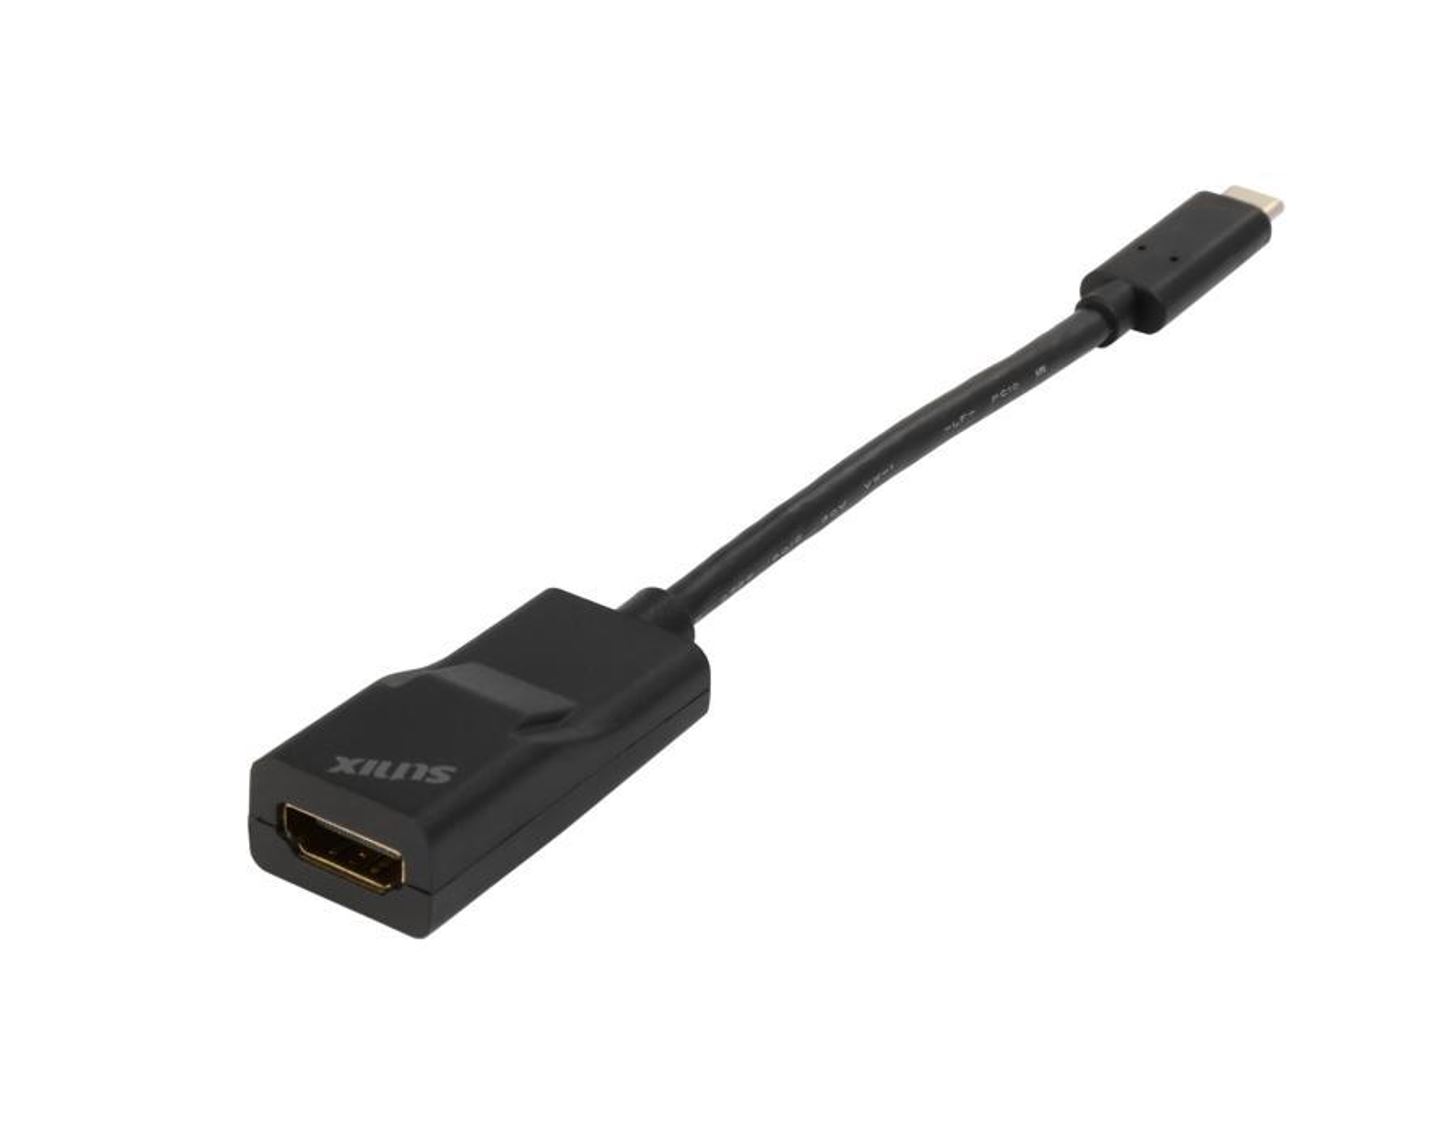 Sunix USB Type C to HDMI 2.0 Adapter (Support 4K @ 60Hz, Active Controller)